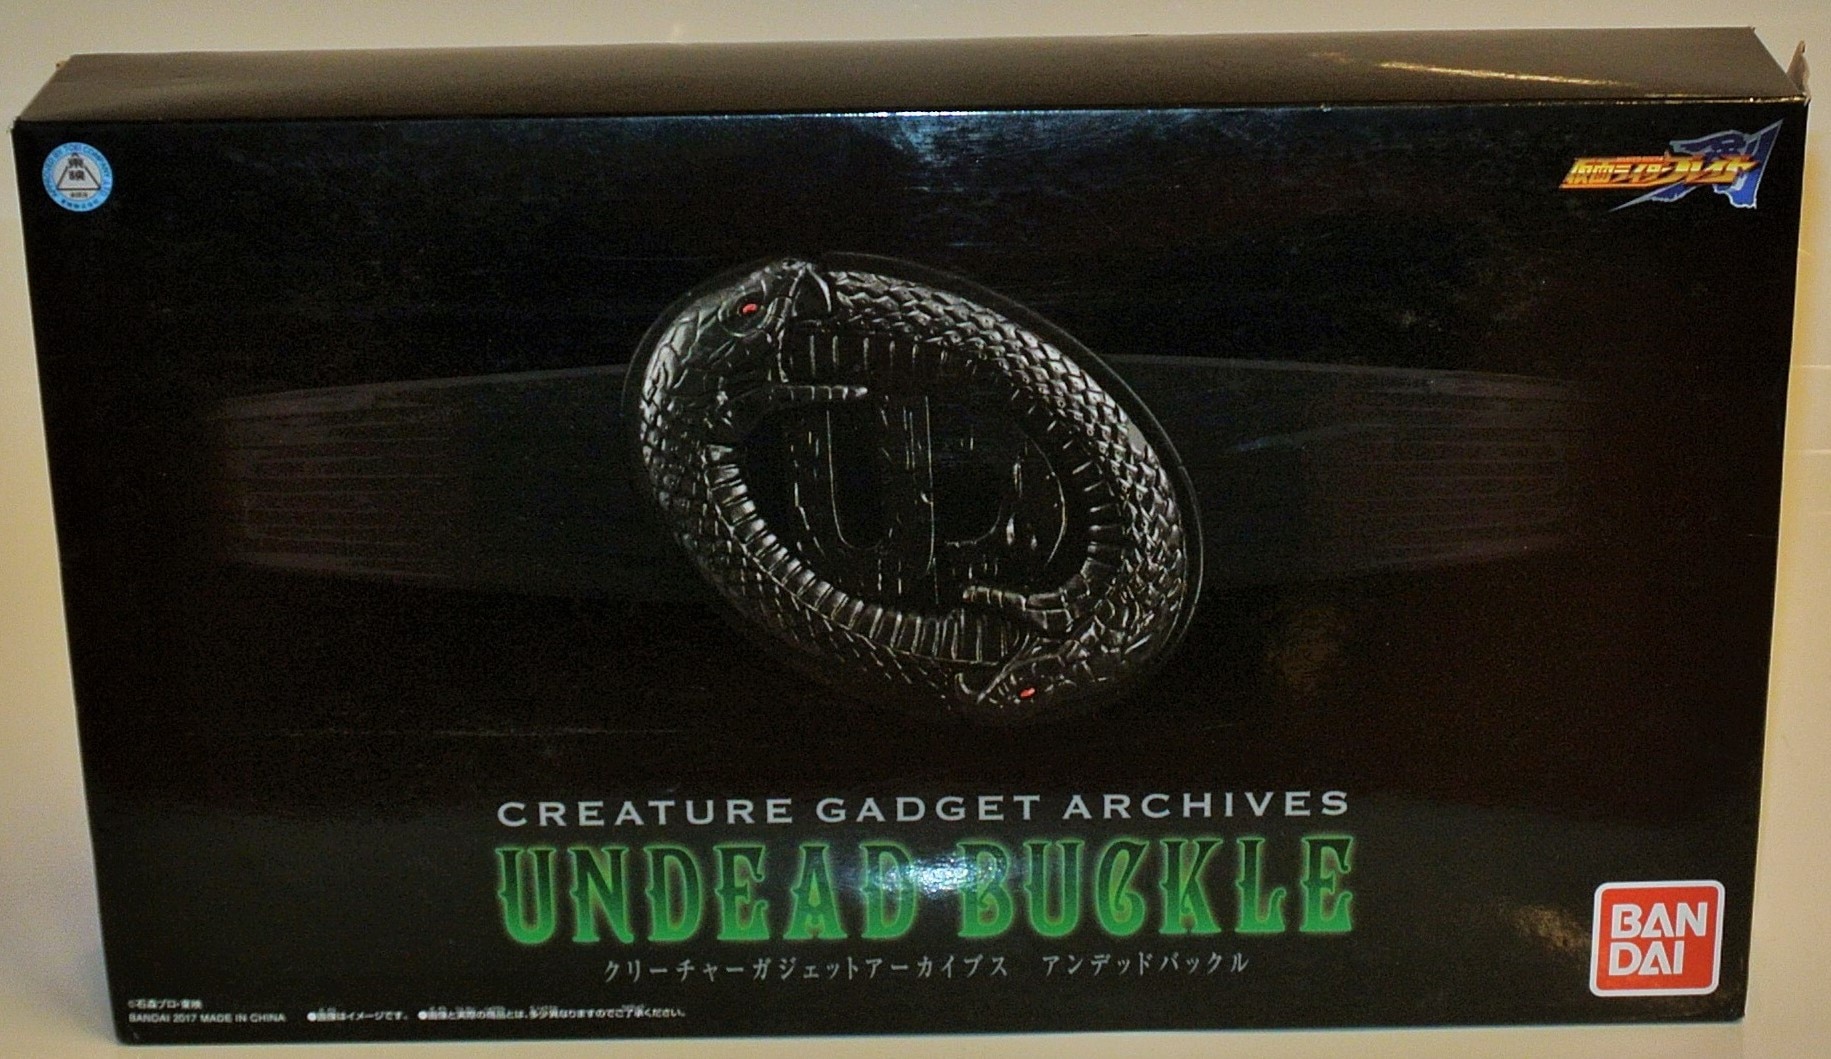 Ron CREATURE GADGET ARCHIVES アンデッドバックル | www.first-code.com